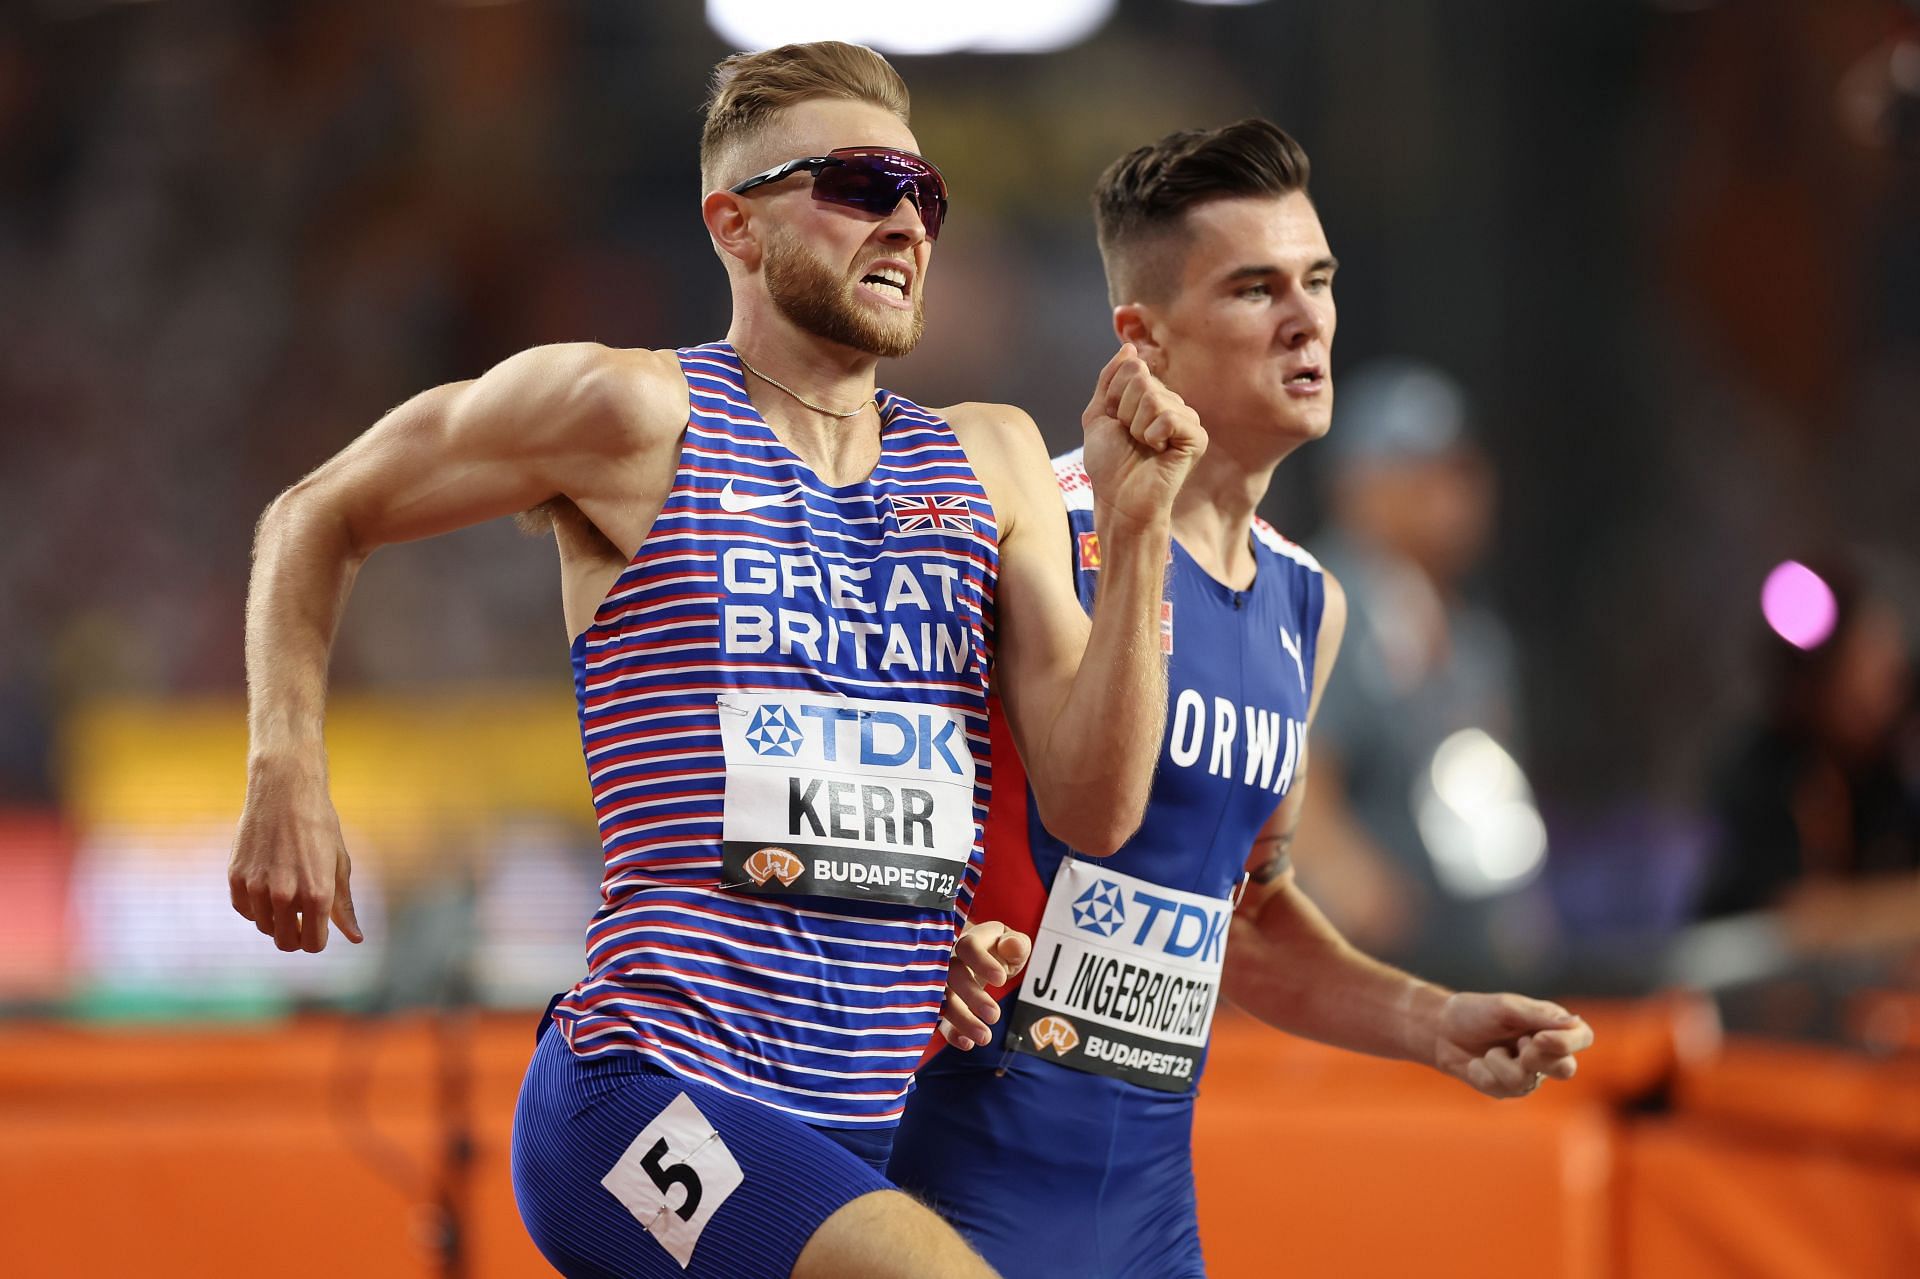 Josh Kerr and Jakob Ingebrigtsen compete in the in the Men&#039;s 1500m final at the World Athletics Championships Budapest 2023. (Photo by Christian Petersen/Getty Images for World Athletics)